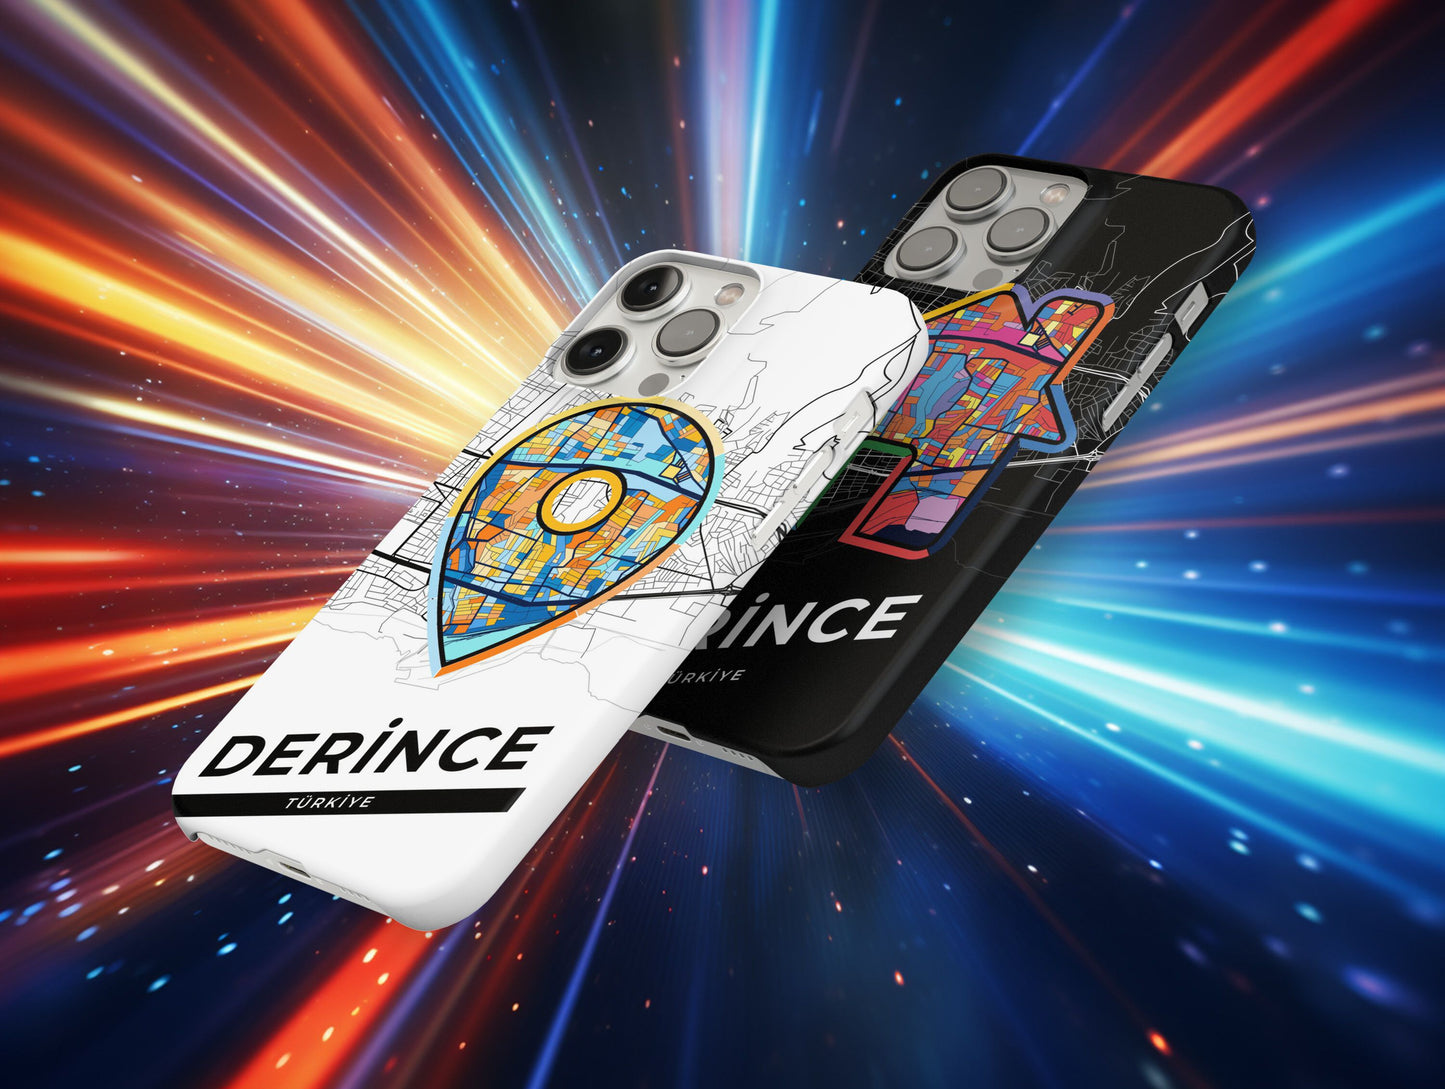 Derince Turkey slim phone case with colorful icon. Birthday, wedding or housewarming gift. Couple match cases.